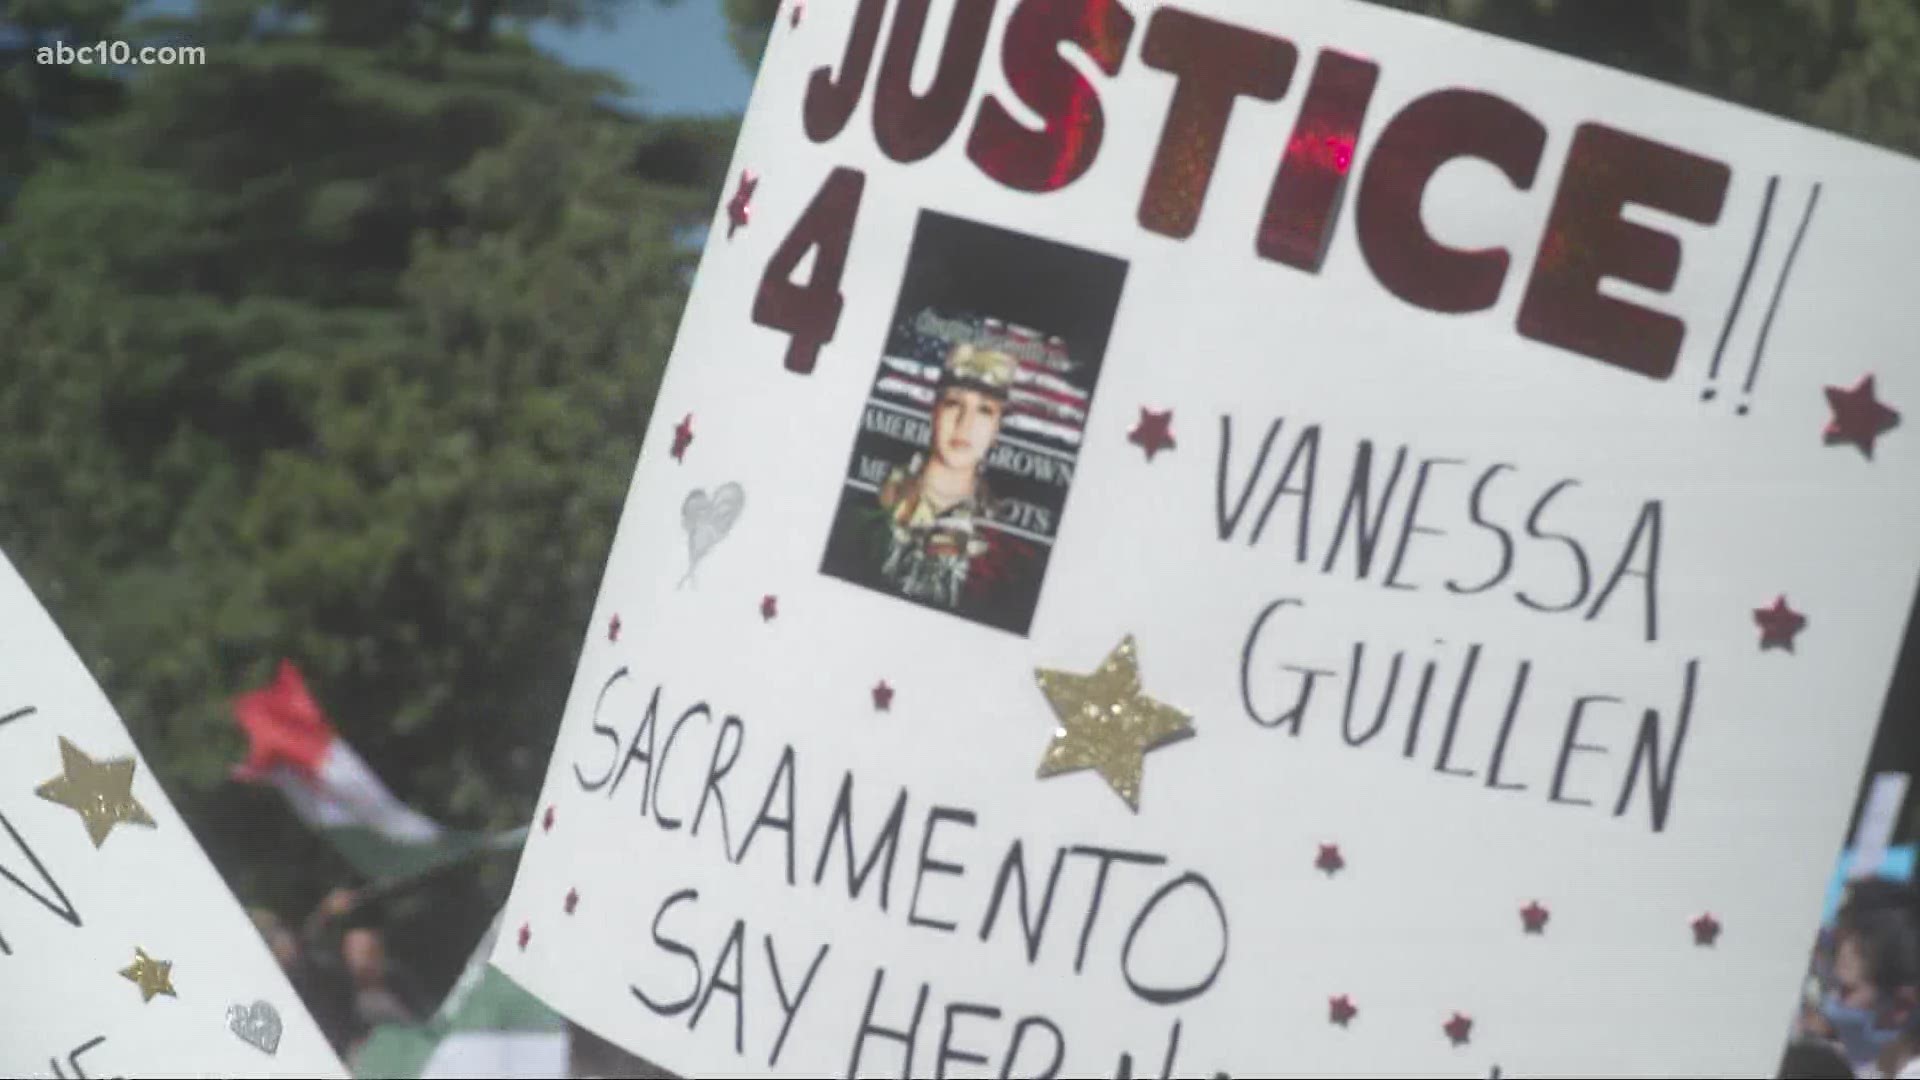 Protesters gathered at the state capitol to ask for zero enlistments until justice is served for U.S. soldier Vanessa Guillen.